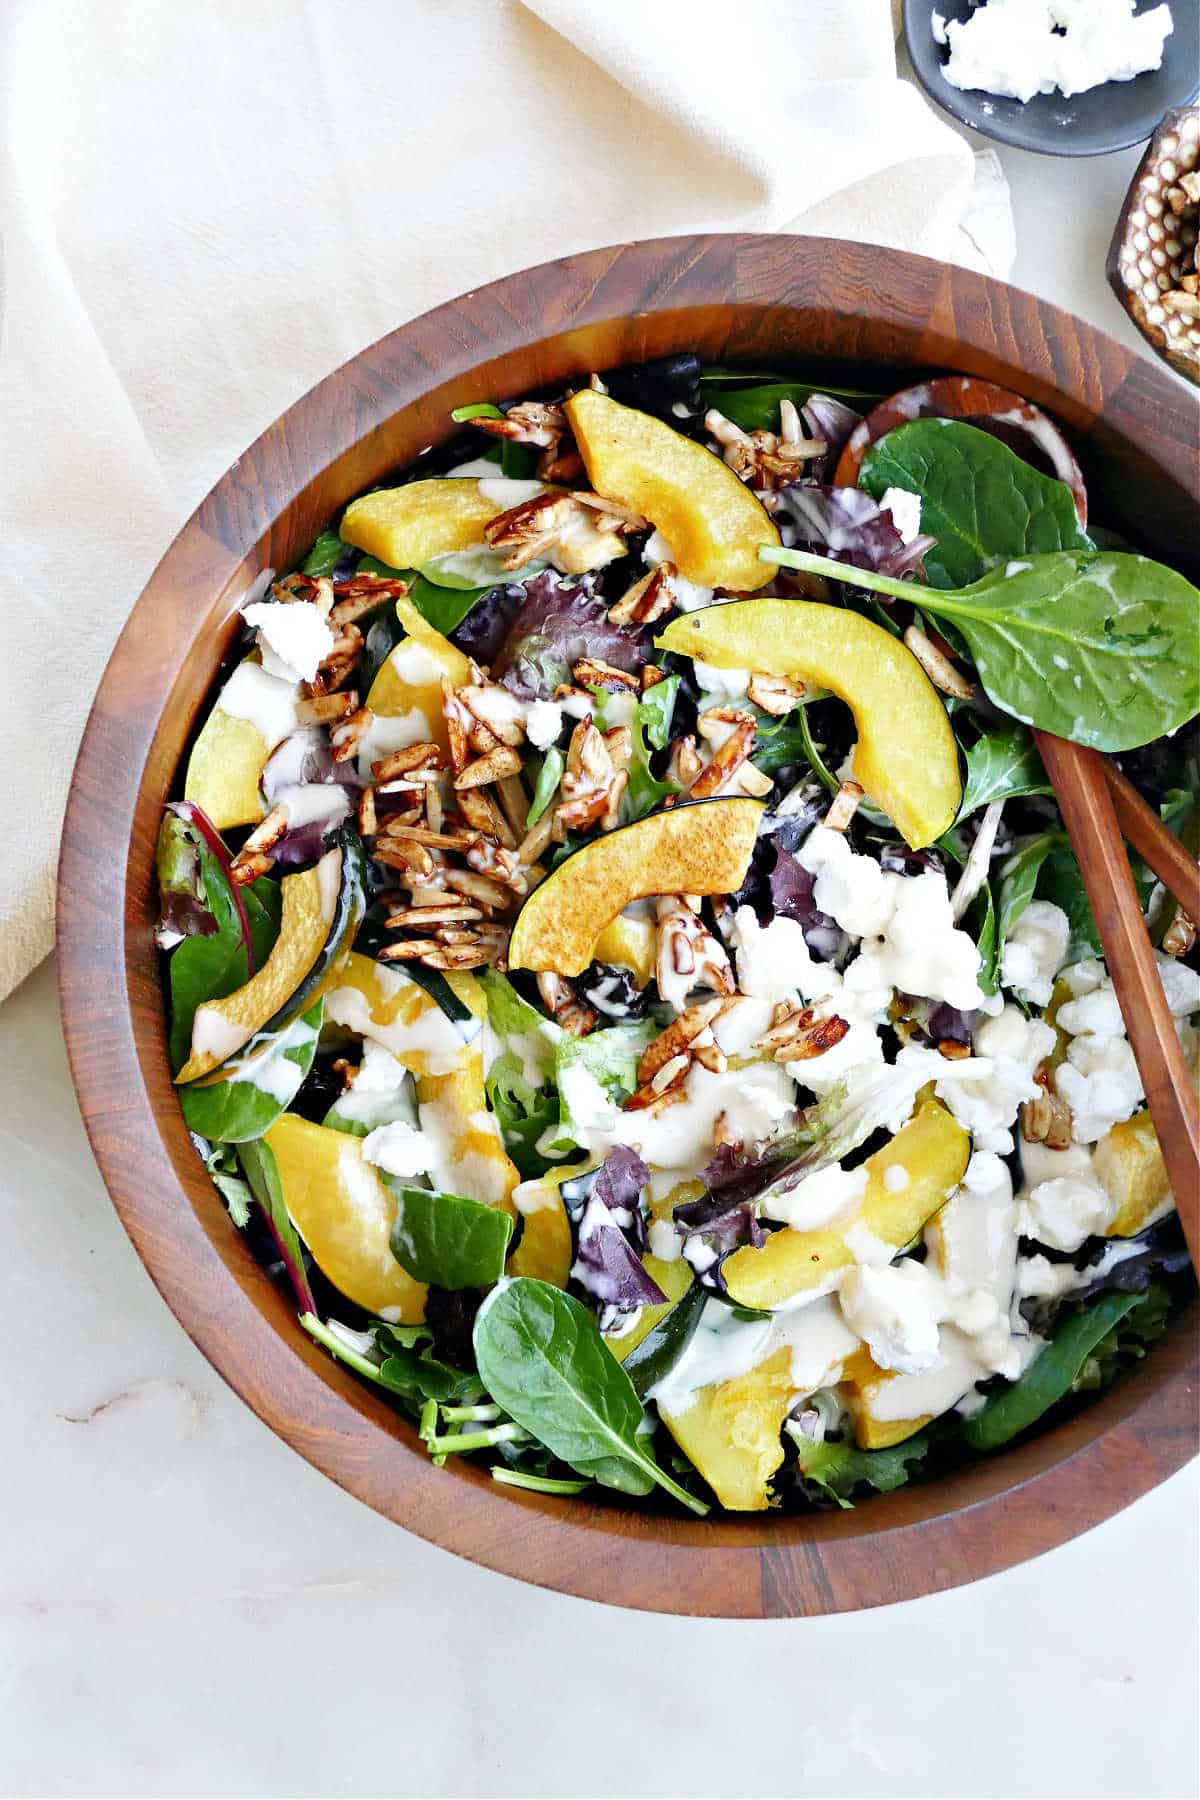 roasted acorn squash with salad greens and tahini dressing in a bowl with tongs